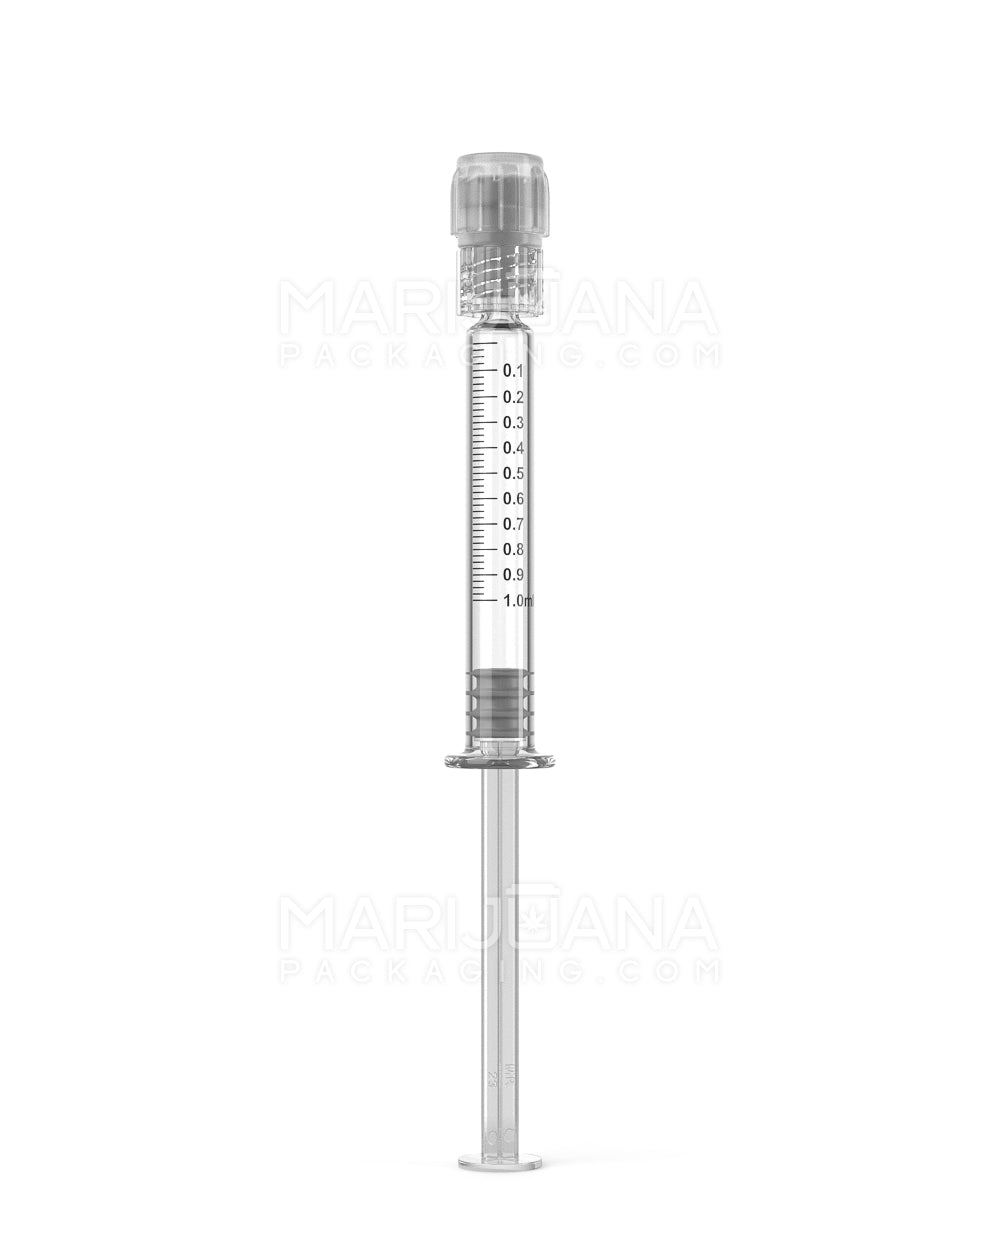 Child Resistant & Luer Lock Long Glass Dab Applicator Syringes | 1mL - 0.1mL Increments | Sample - 1